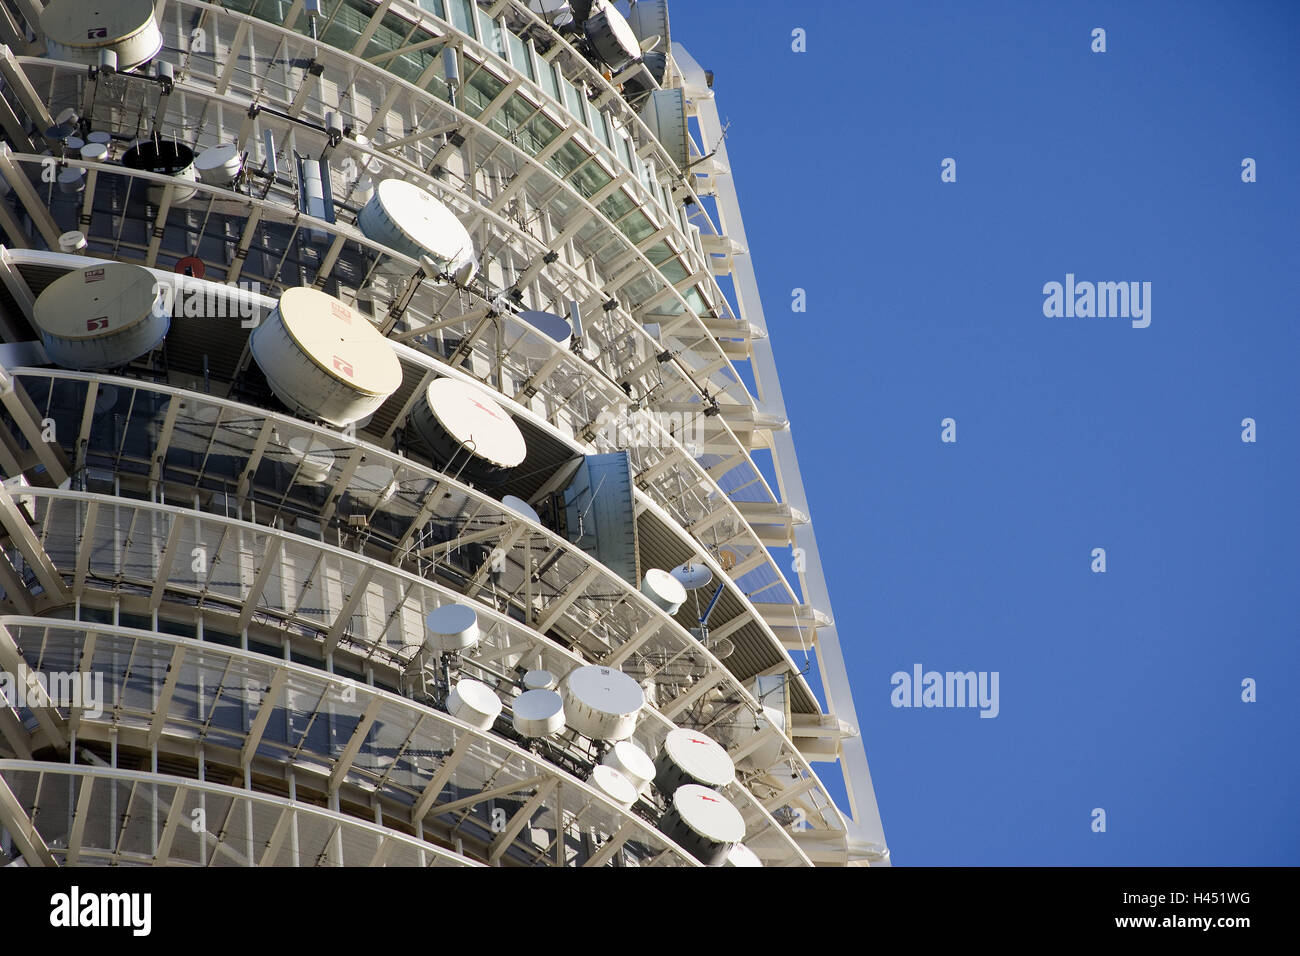 Spain, Catalonia, Barcelona, Torre de Collserola, detail, heaven, town, building, structure, architecture, tower, Tibidabo, sending tower, radio tower, television tower, observation tower, Collserola tower, transmitter, place of interest, outside, Stock Photo